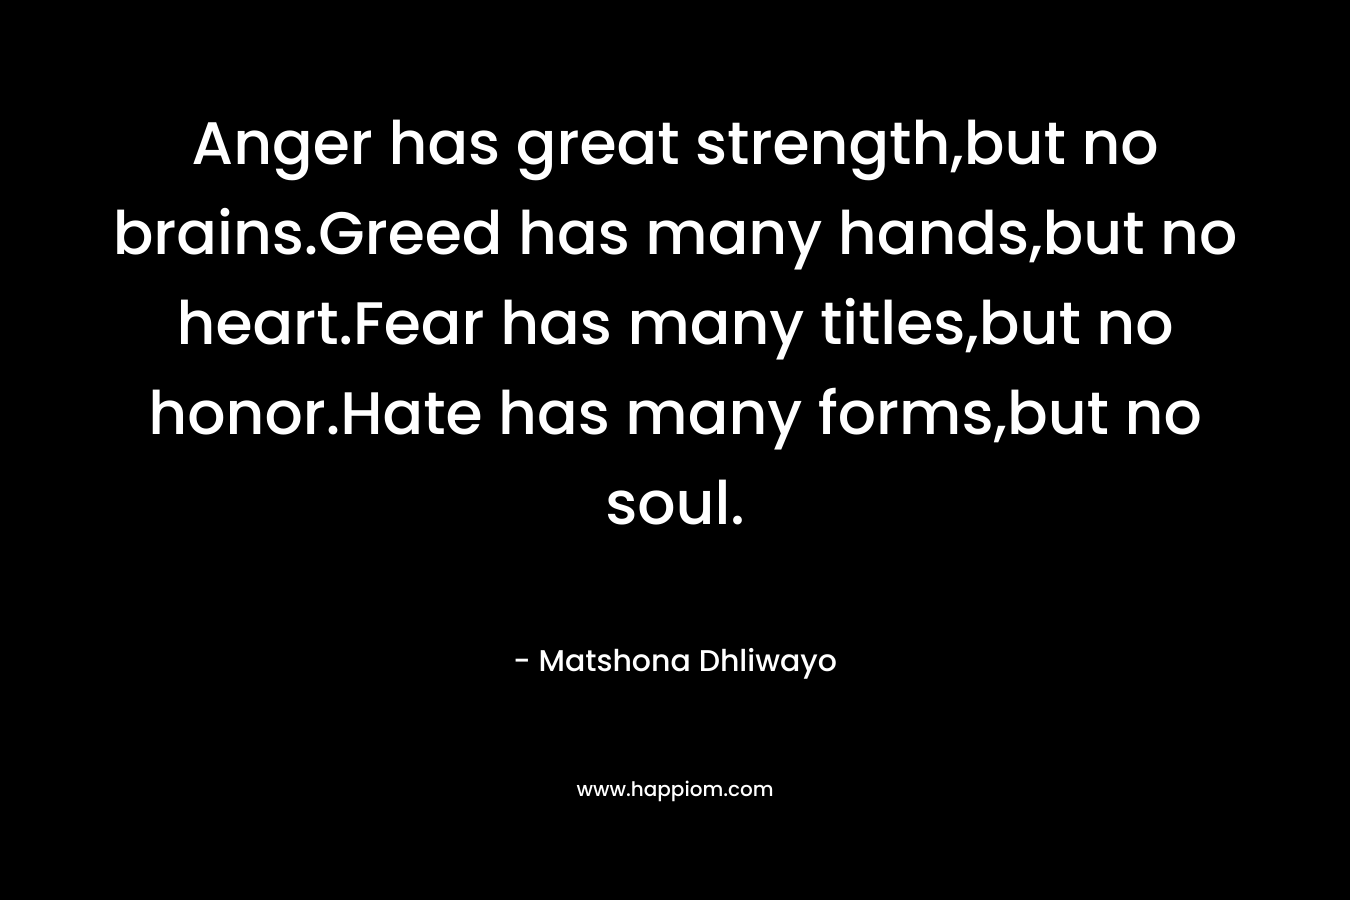 Anger has great strength,but no brains.Greed has many hands,but no heart.Fear has many titles,but no honor.Hate has many forms,but no soul.